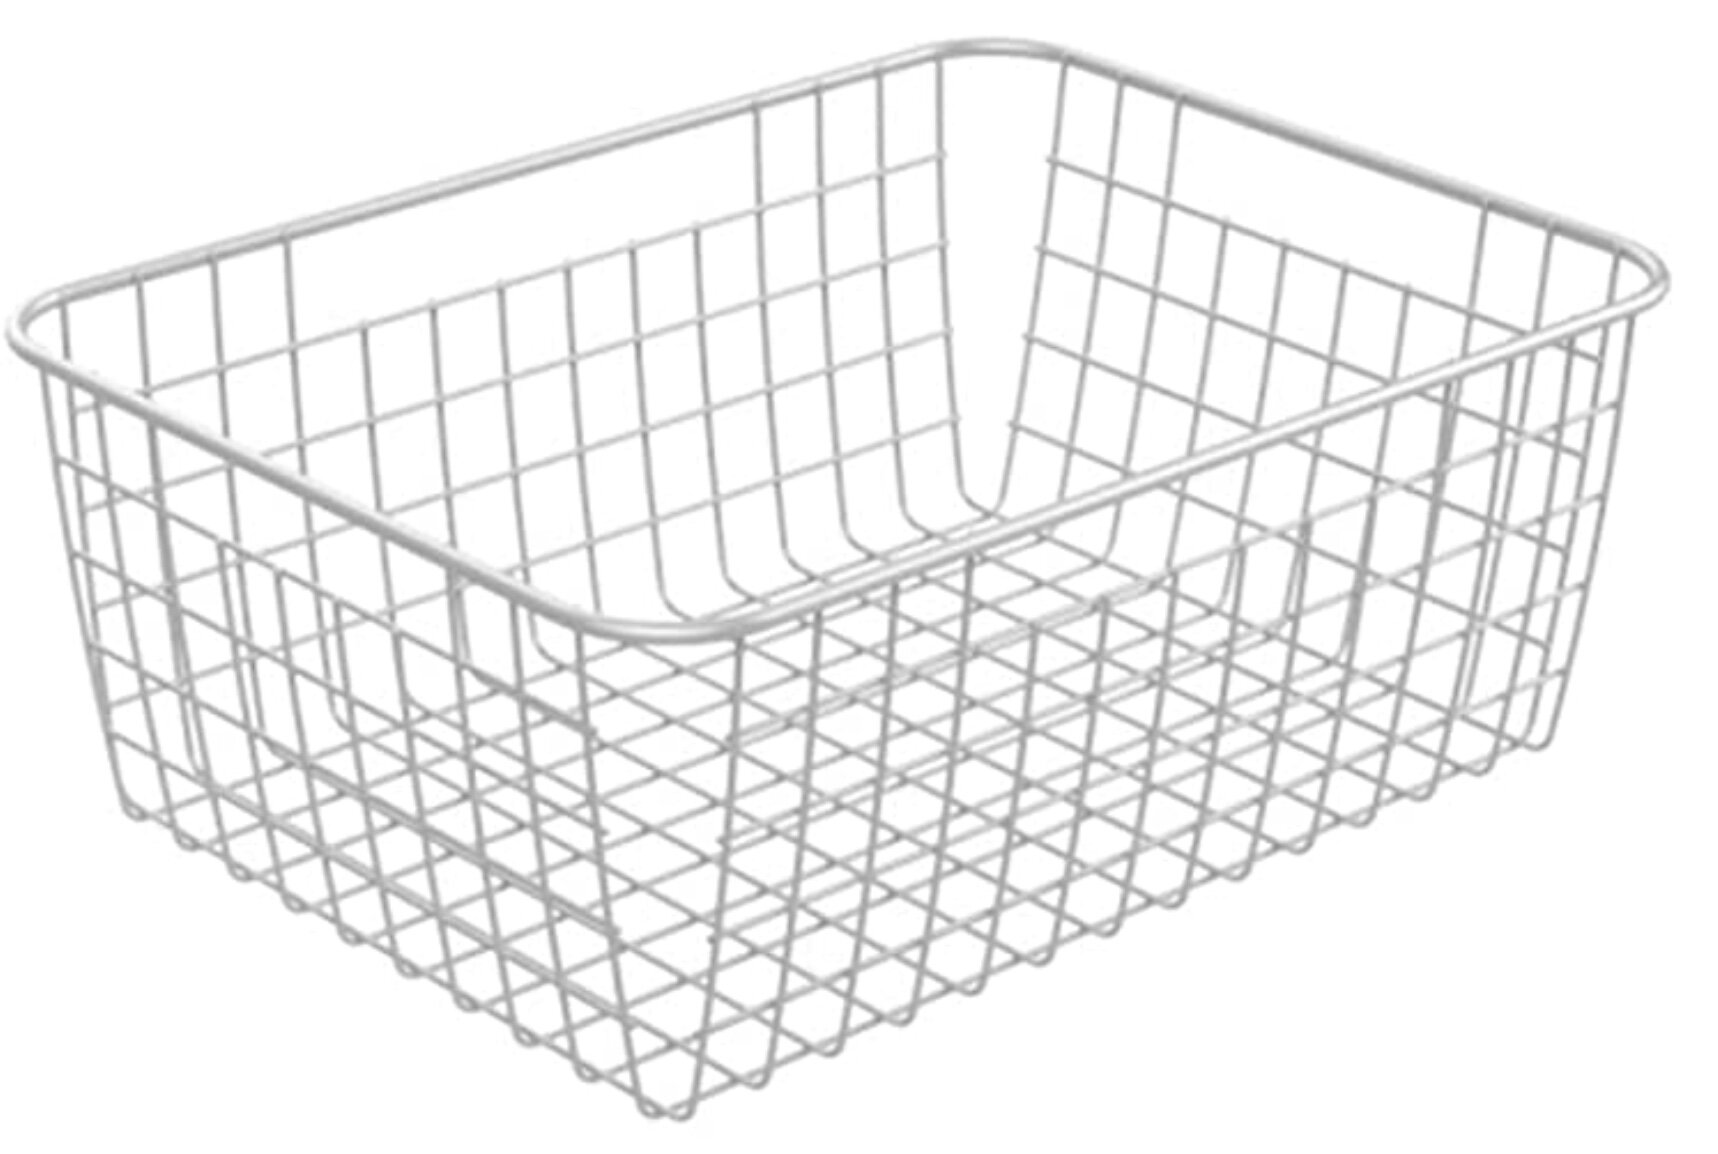 6 x large white wire baskets